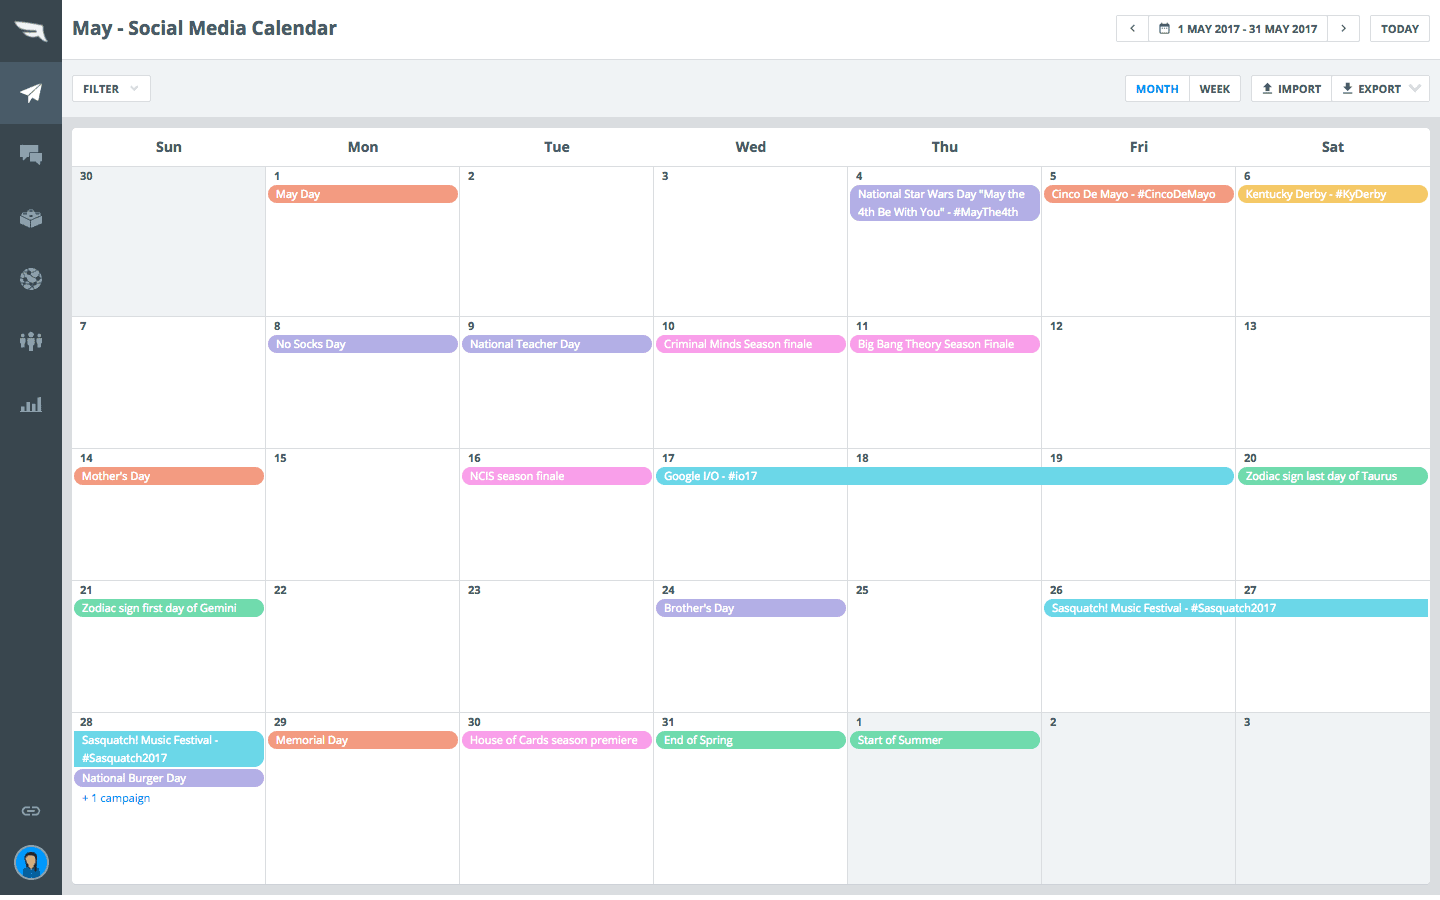 How to Build an Incredible Social Media Content Calendar in 10 Steps